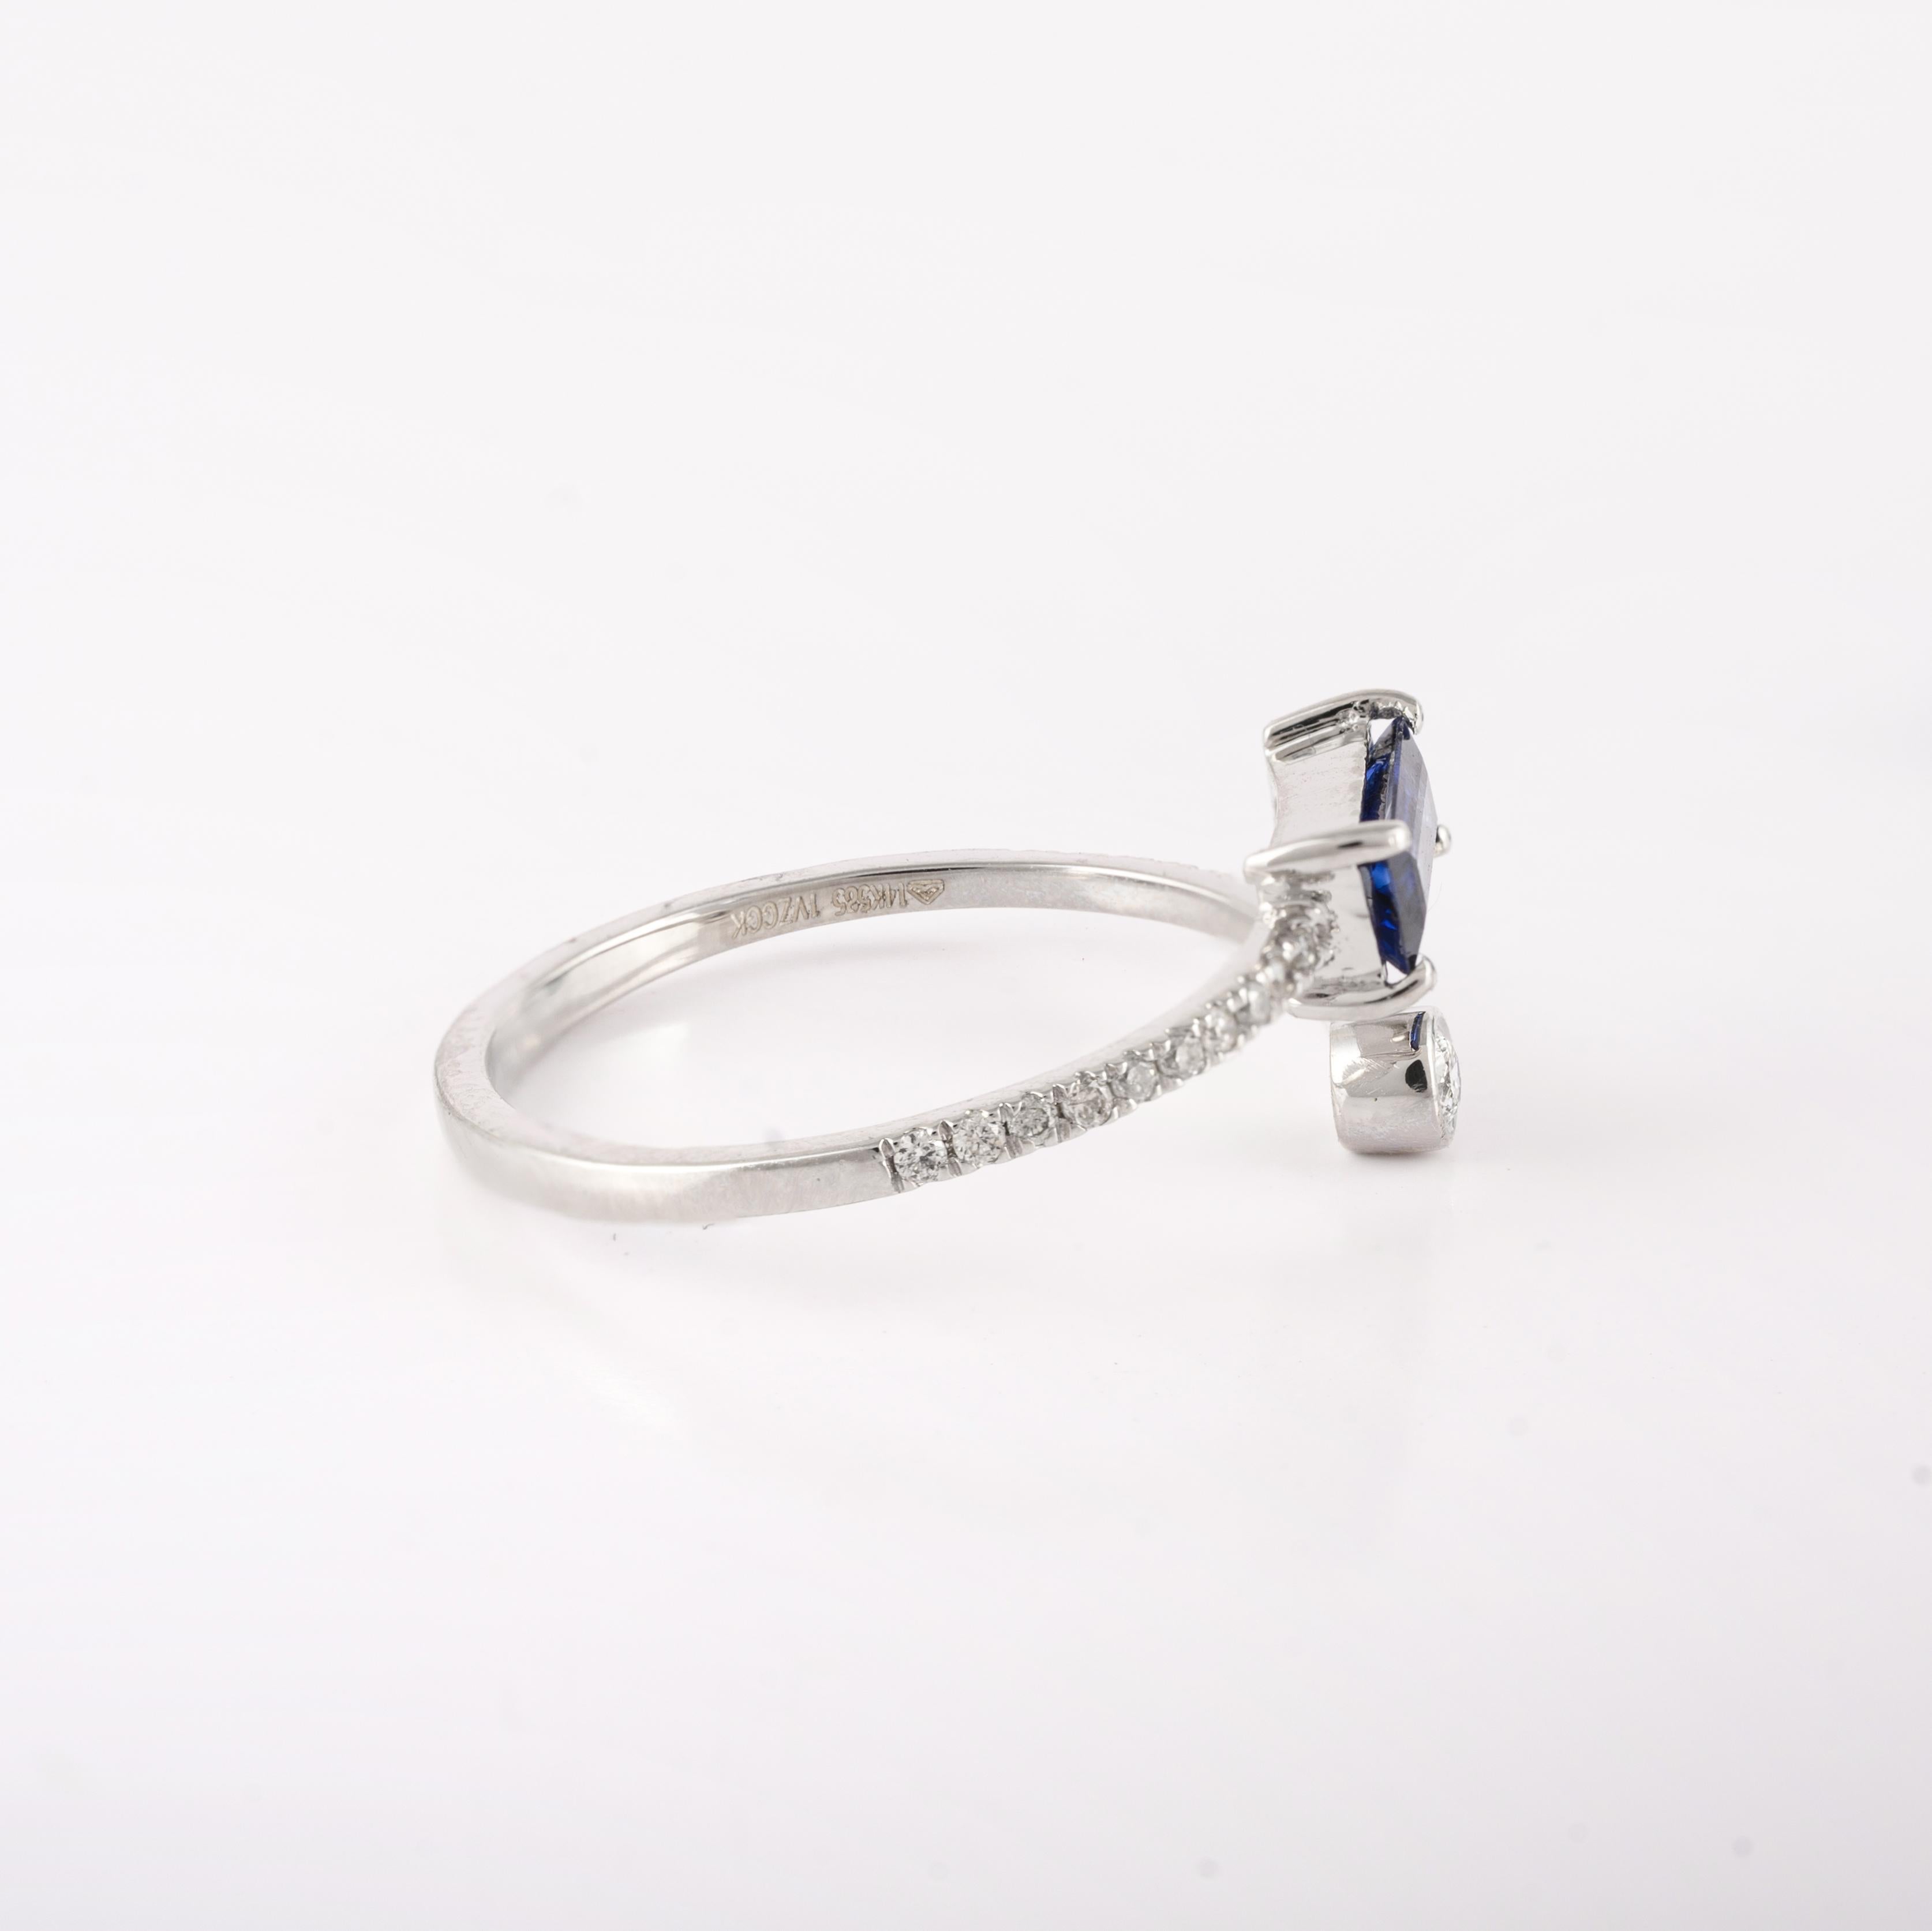 For Sale:  14k Solid White Gold Minimalist Open Ring with Blue Sapphire and Diamonds 6